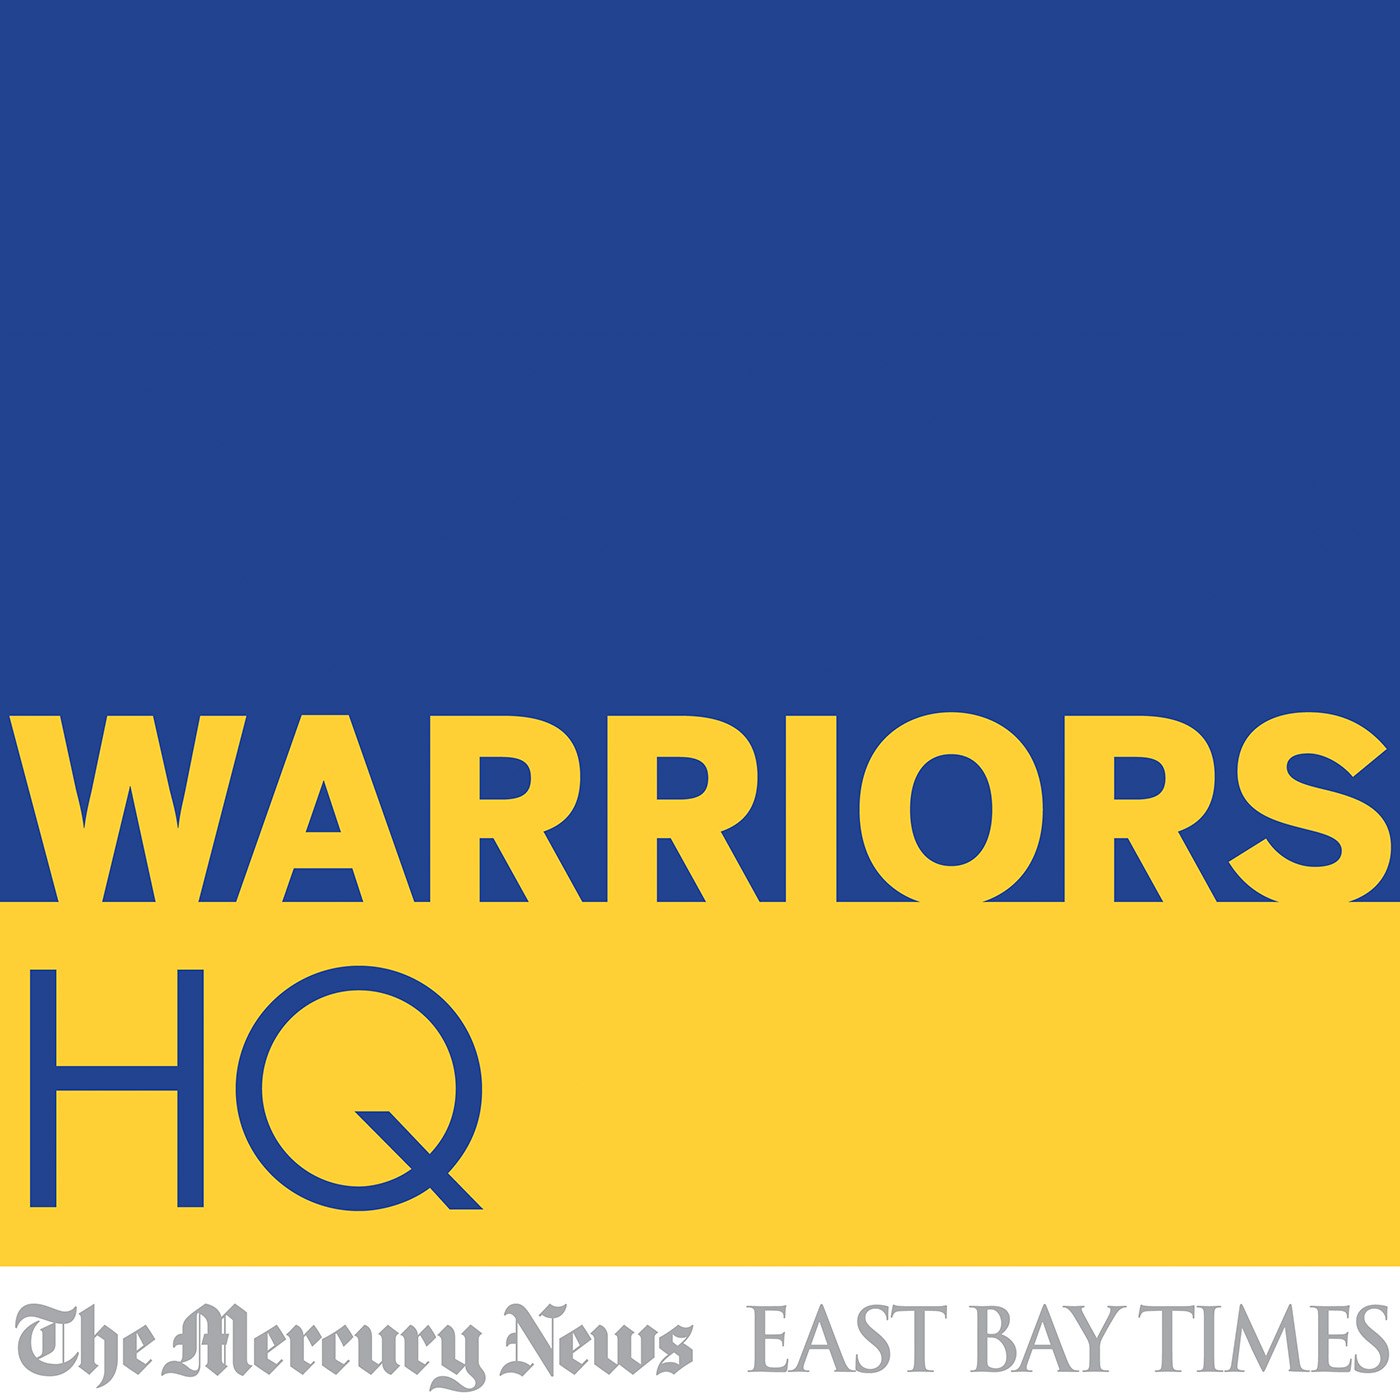 Warriors conquer LA with help from Cousins, Thompson